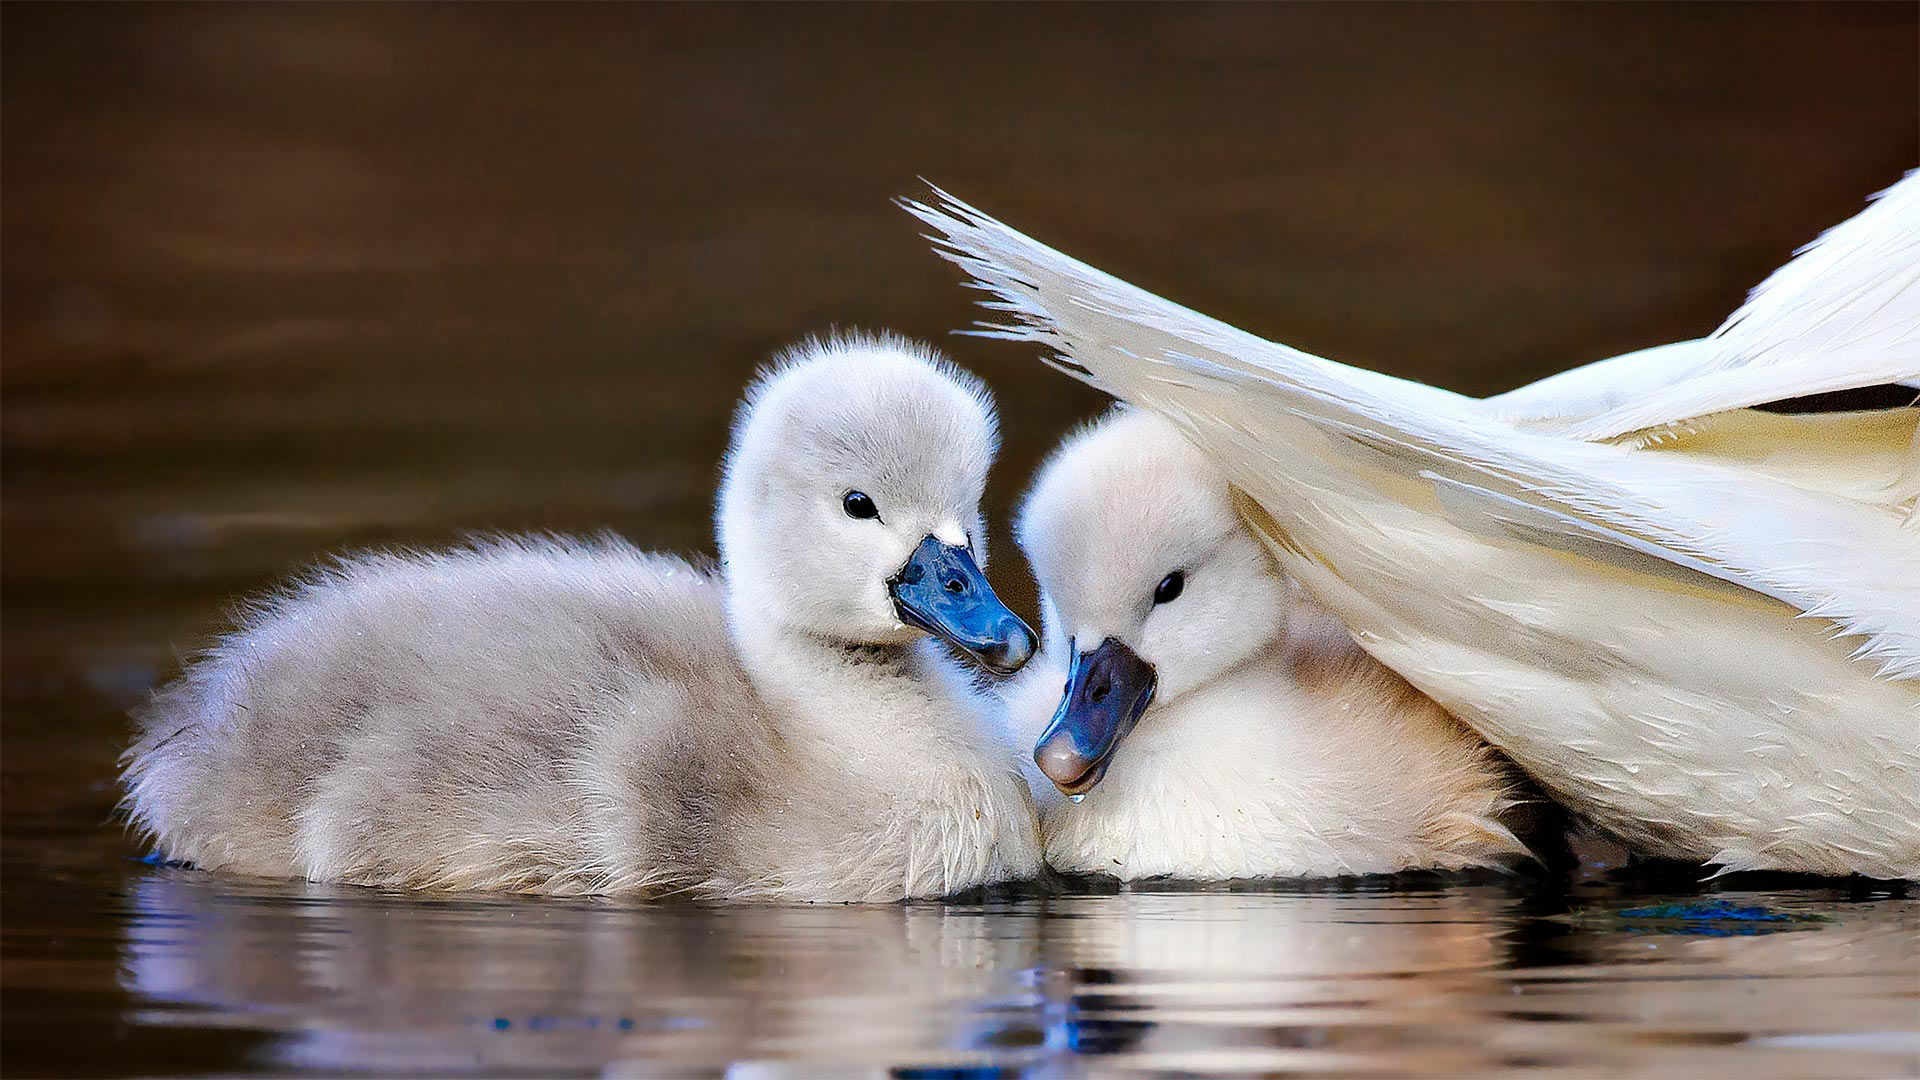 Mute swan chicks shelter under mom's tail feathers, Massapequa Preserve, Long Island, New York - Vicki Jauron/Getty Images)